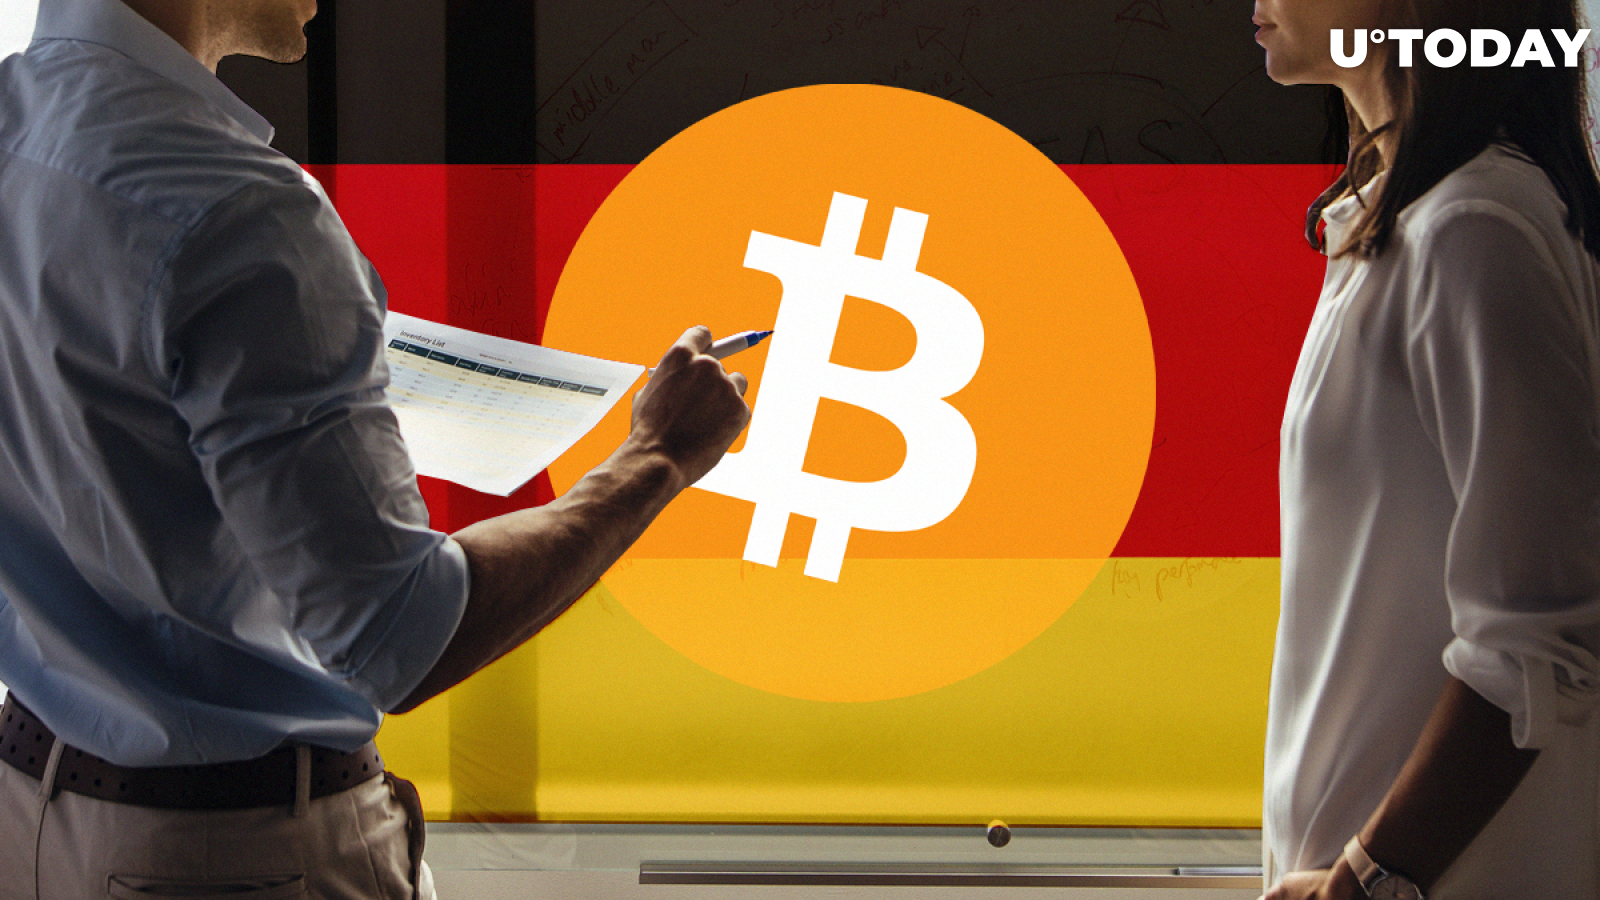 Banker Says Bitcoin Will Appeal to Millennials as Deutsche Bank Plans Negative Rates